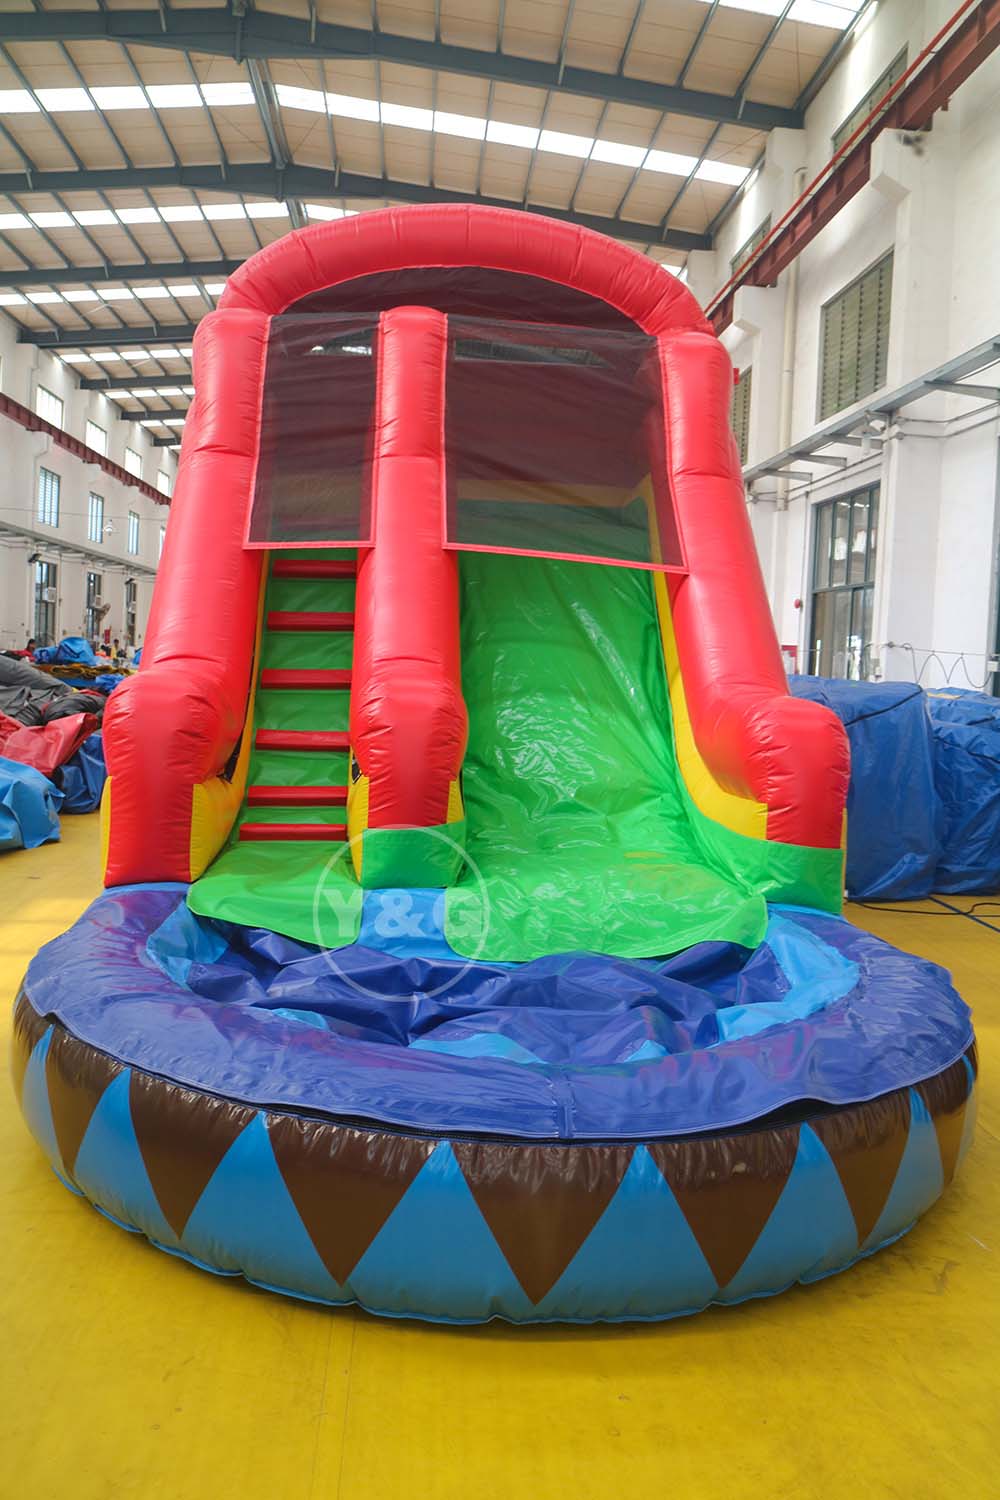 Inflatable water slide for kidsYG-101